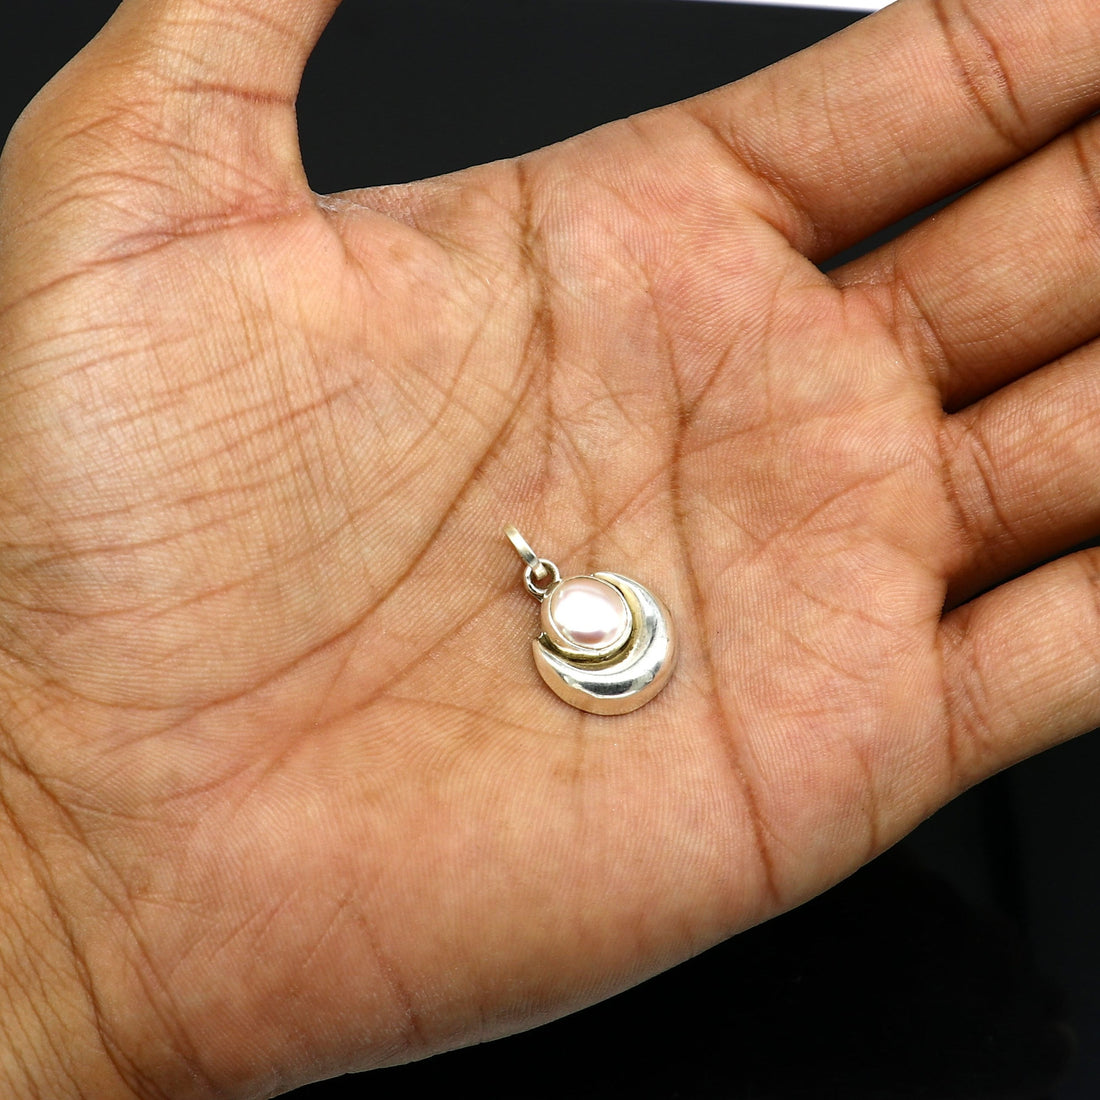 925 sterling silver handmade moon pendant with natural pearl, stunning unisex pearl moon pendant, best gifting jewelry from india ssp648 - TRIBAL ORNAMENTS